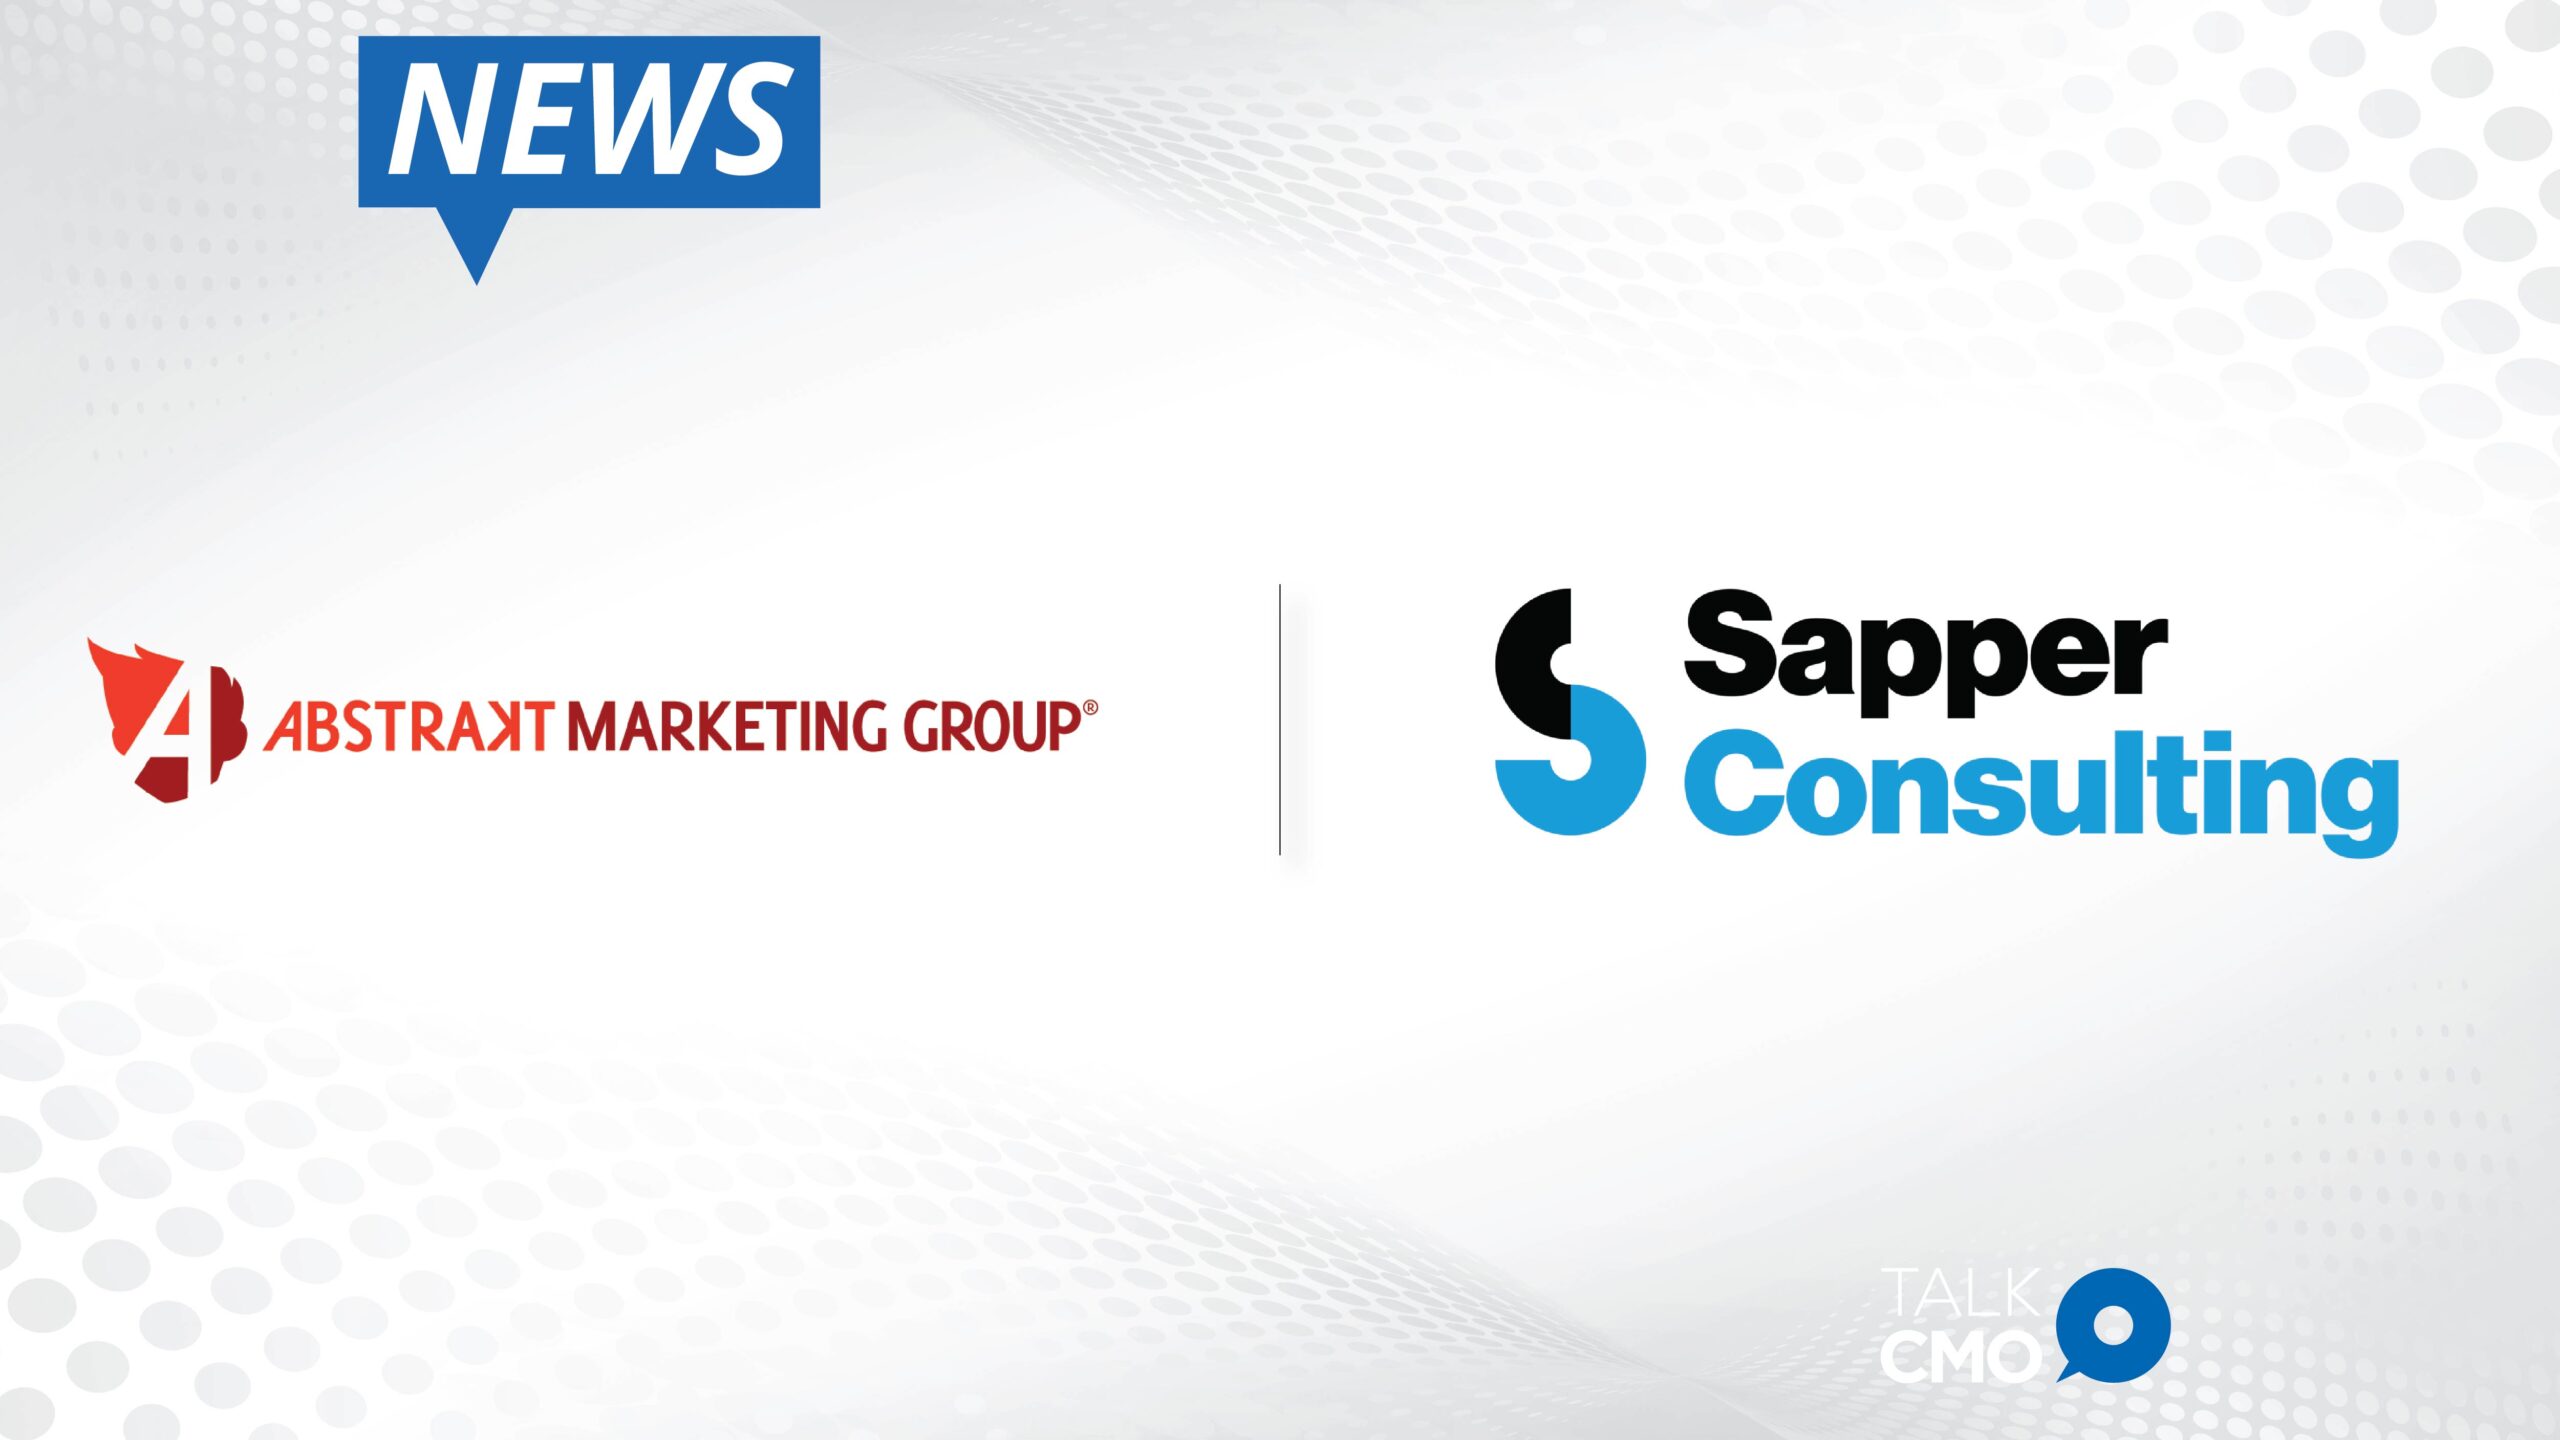 Abstrakt Marketing Acquires Sapper Consulting